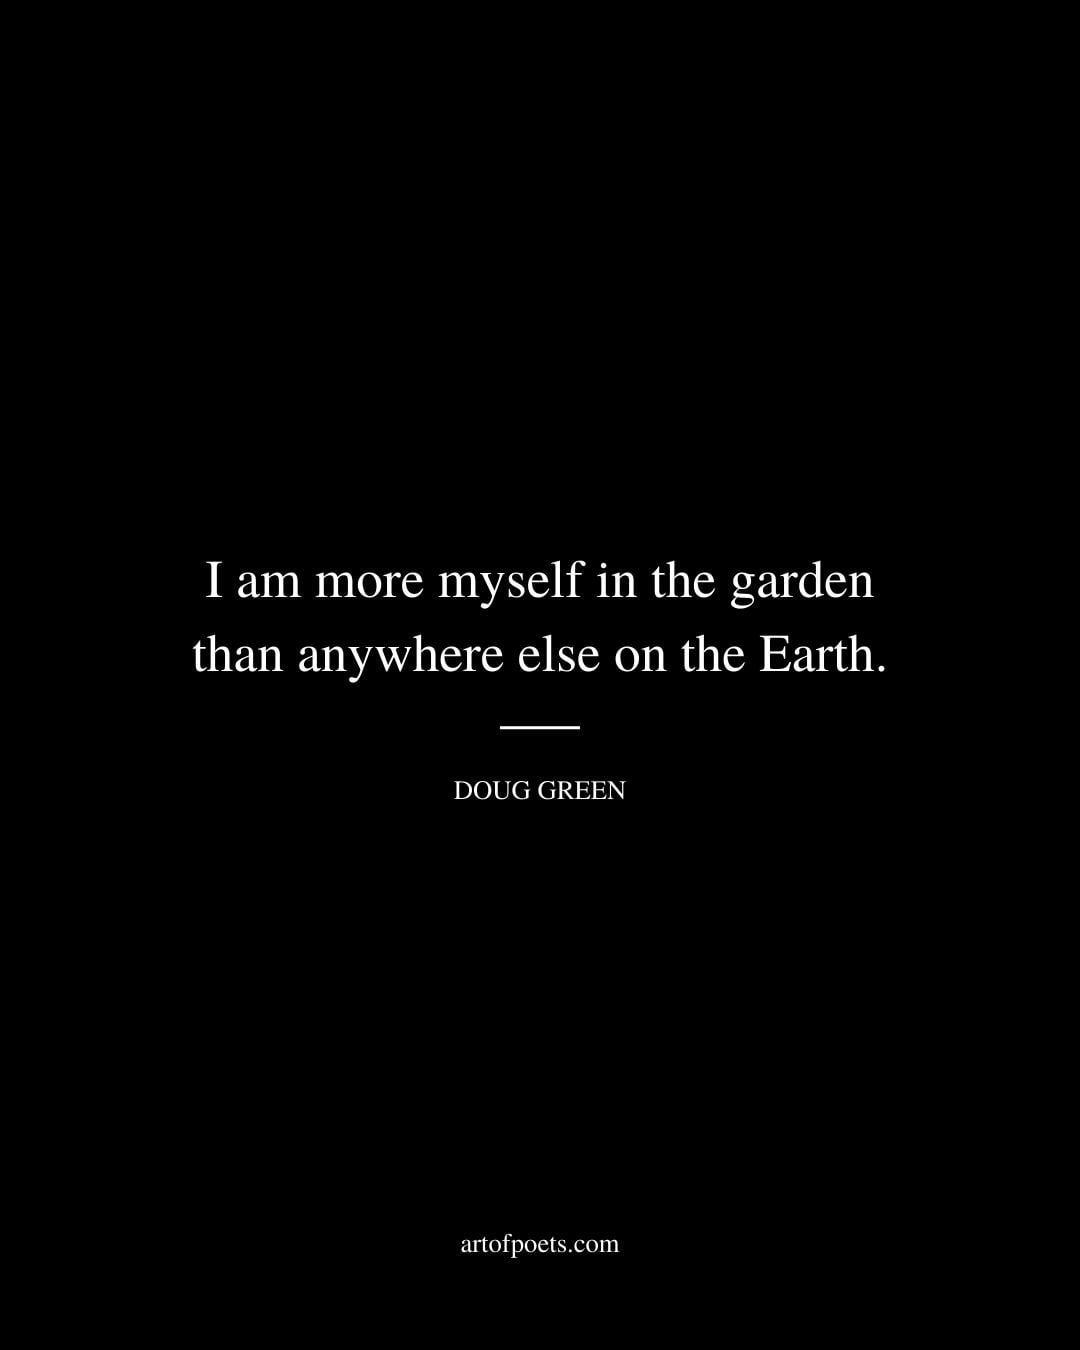 I am more myself in the garden than anywhere else on the Earth. Doug Green